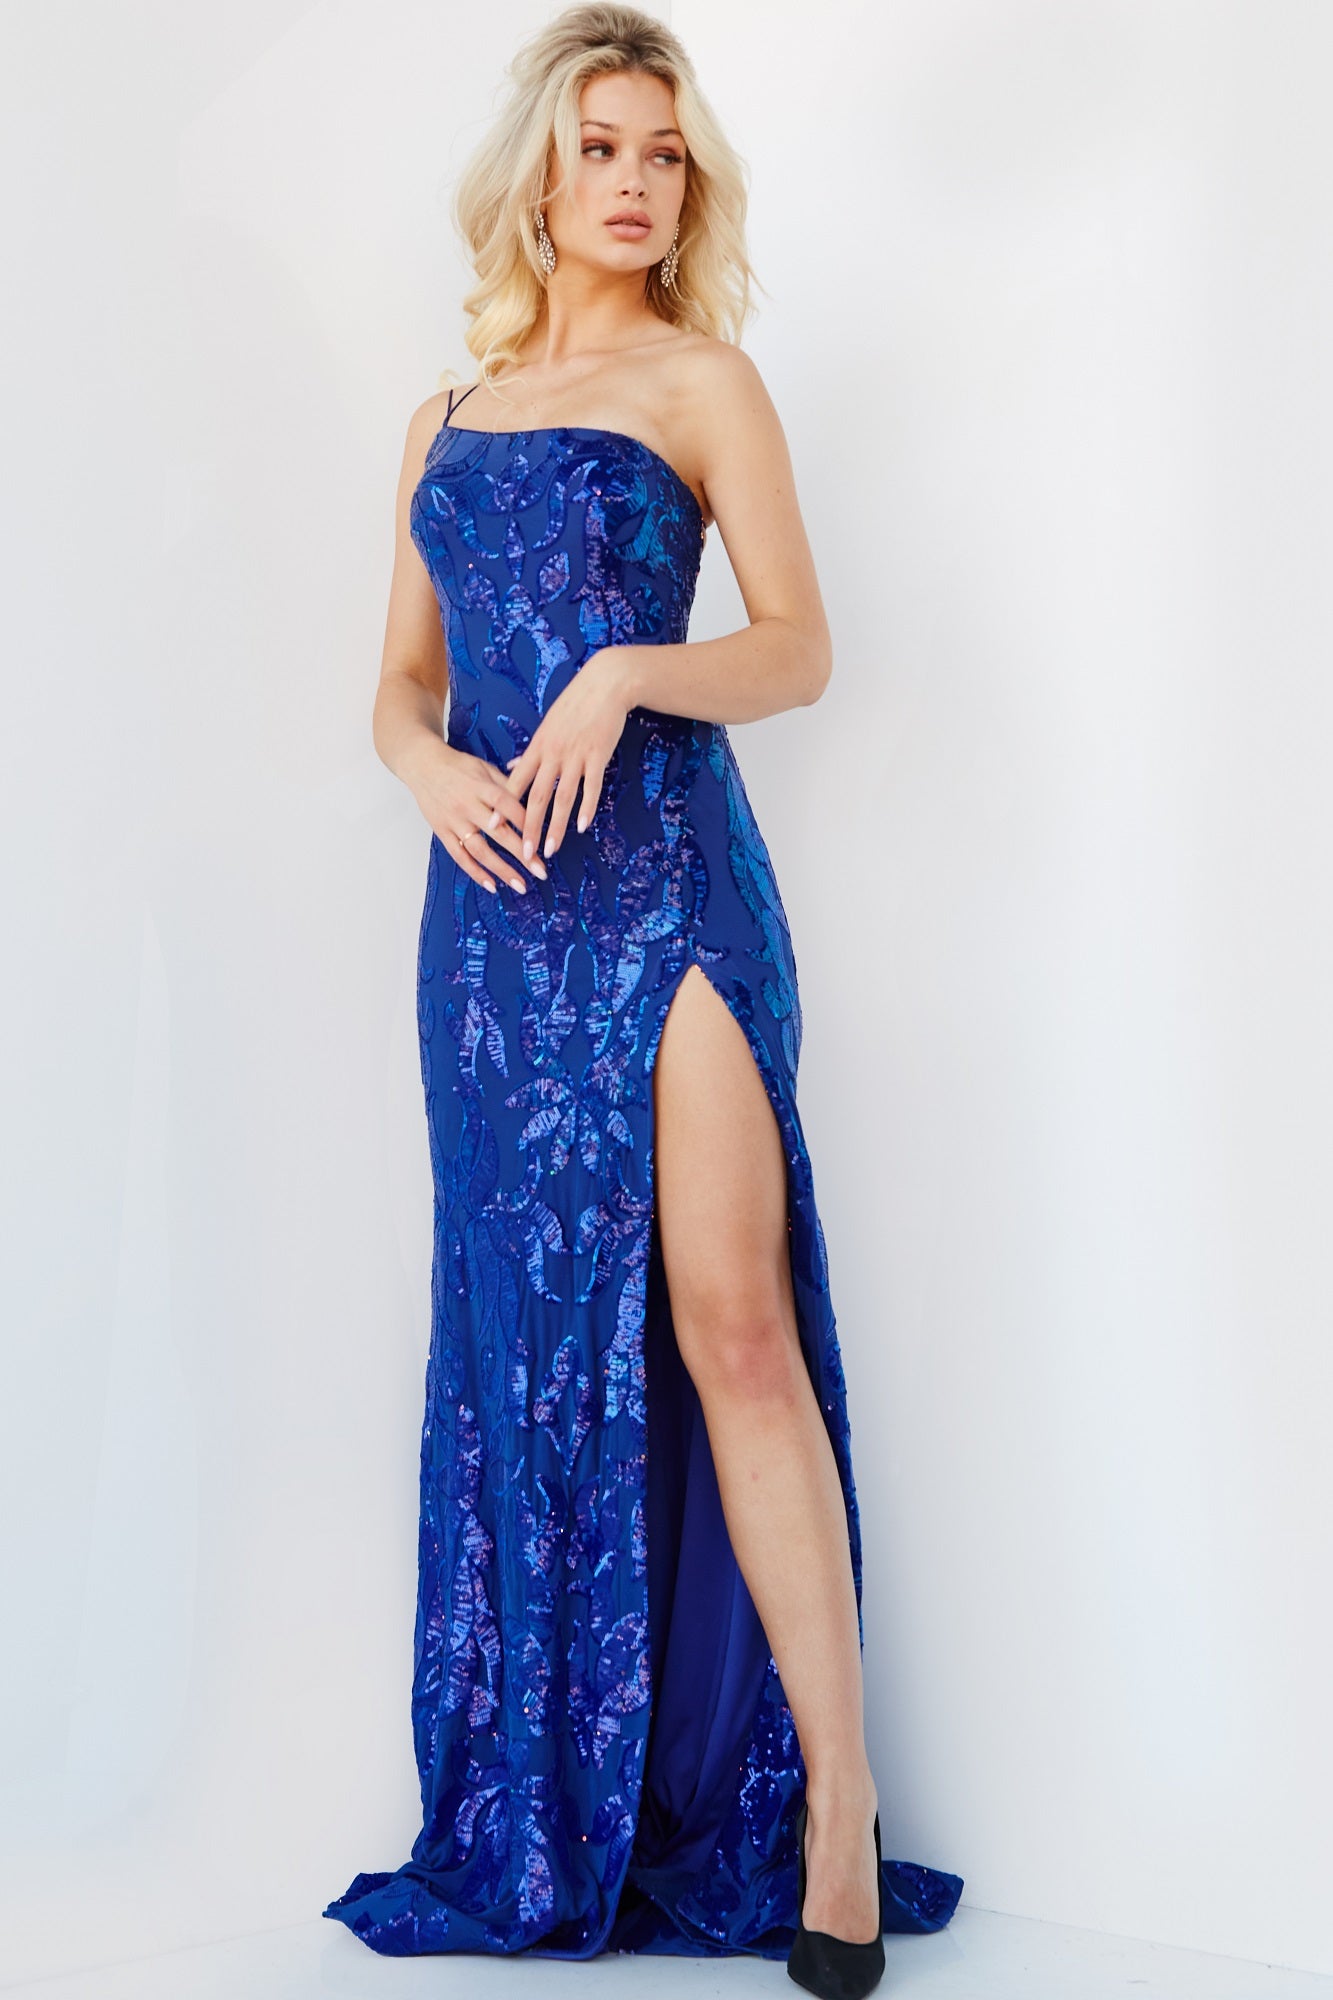 Jovani 07913 prom dress features a strapless fitted bodice made with sparkling sequins. The dress has a high slit that adds a touch of  it has double spaghetti straps that lead to a backless corset